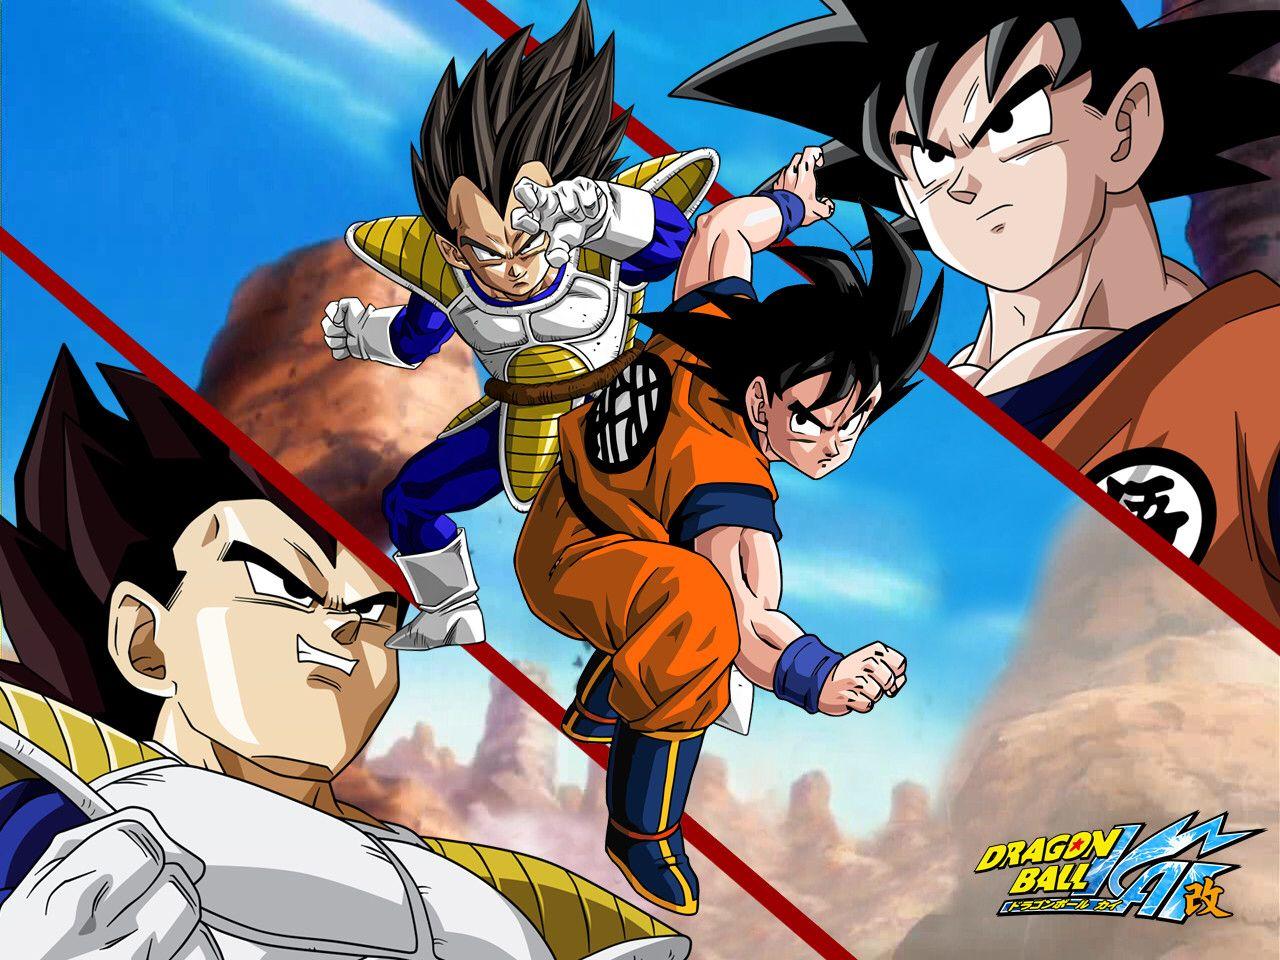 Goku and Vegeta face off! The whole scene before they stared was